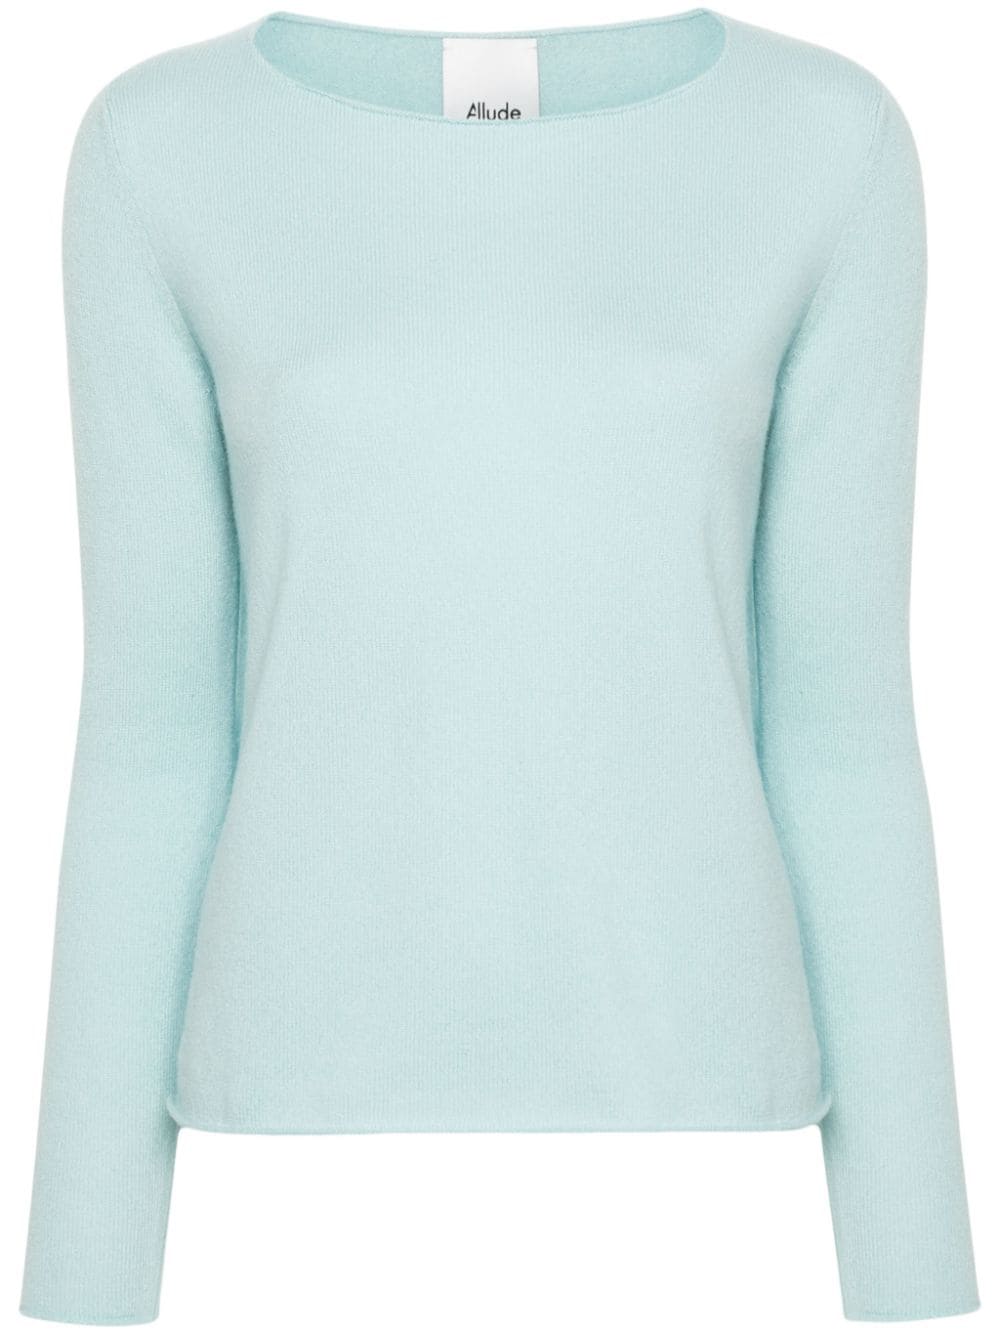 Allude long-sleeve cashmere jumper - Blue von Allude